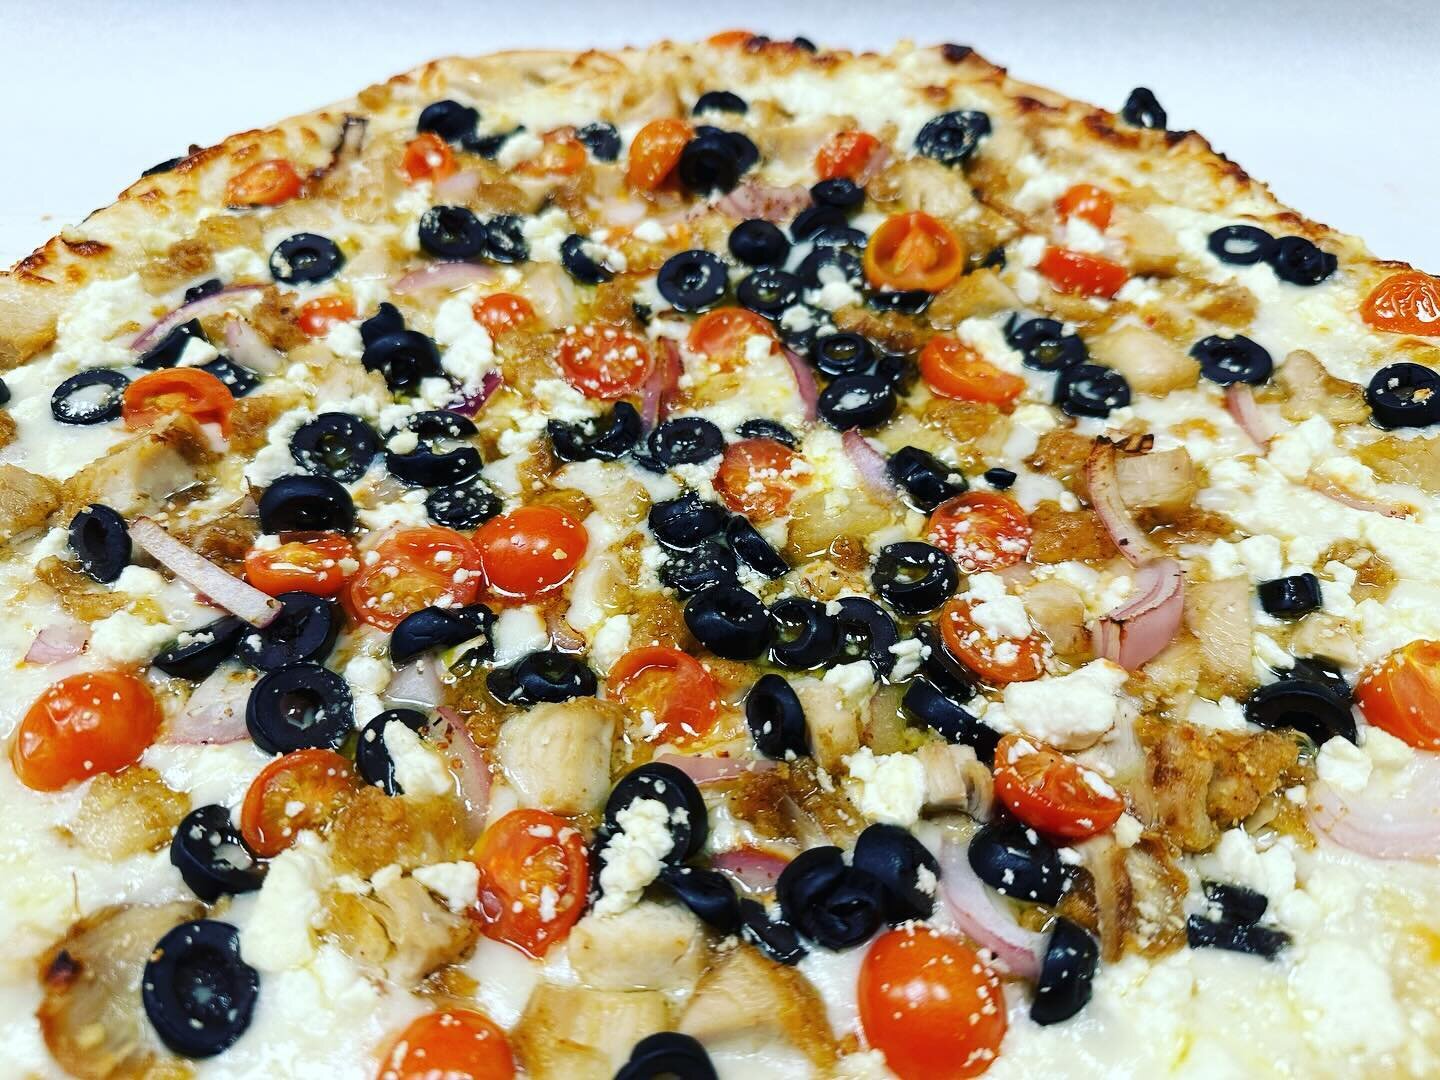 WE ARE VERY EXCITED FOR OUR FEBRUARY MONTHLY SPECIAL. 

For the month of February, we are showcasing our X-Large Chicken Mediterranean Pizza! 

Garlic butter base, mozzarella cheese, chicken, red onions, black olives, cherry tomatoes, topped with Fet